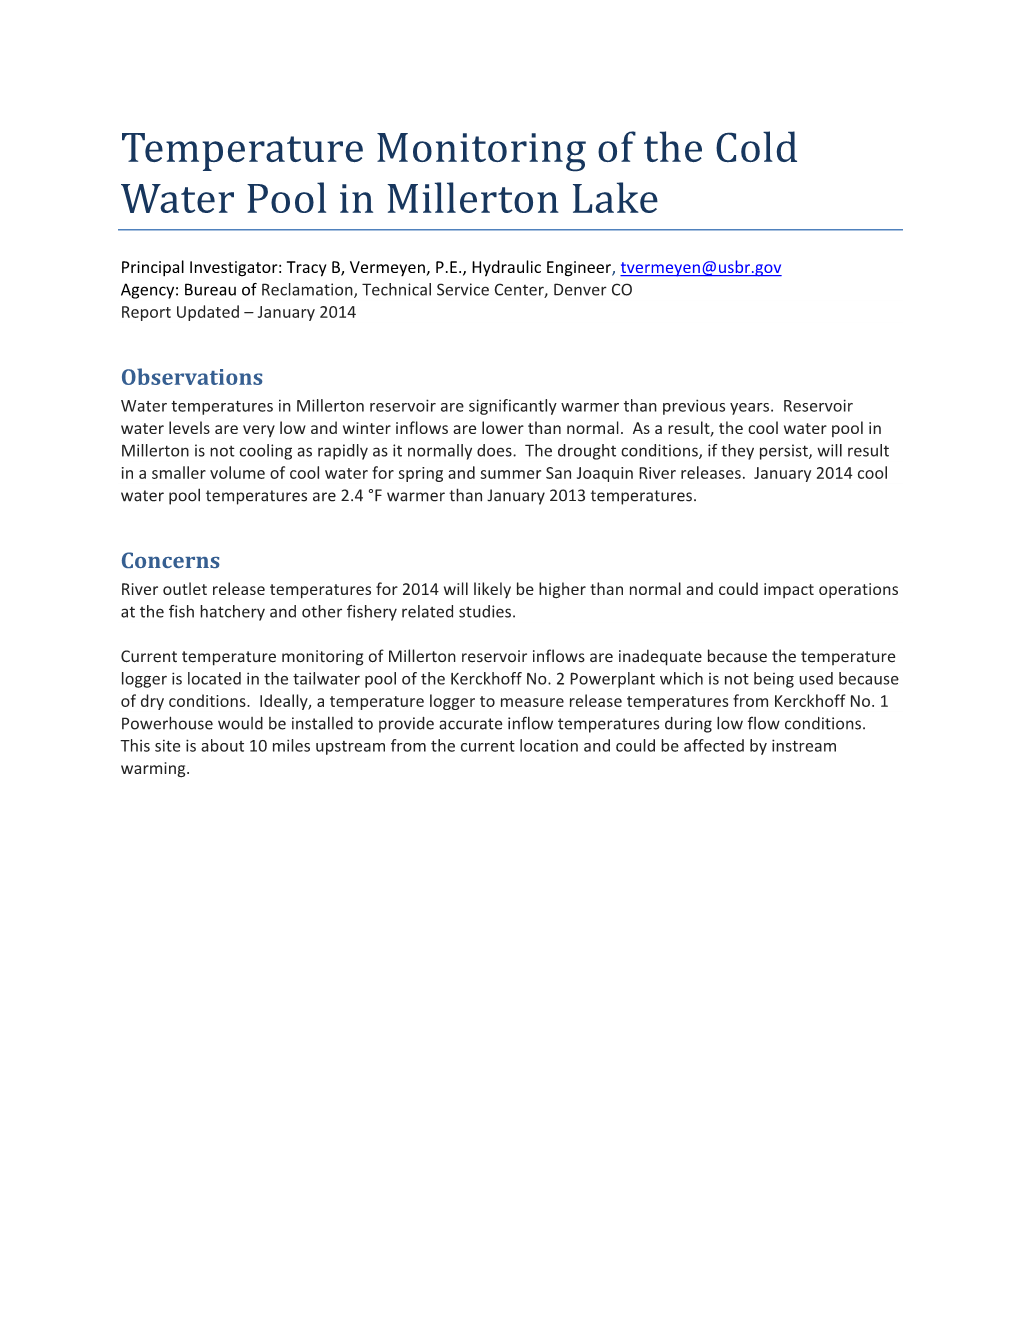 Temperature Monitoring of the Cold Water Pool in Millerton Lake